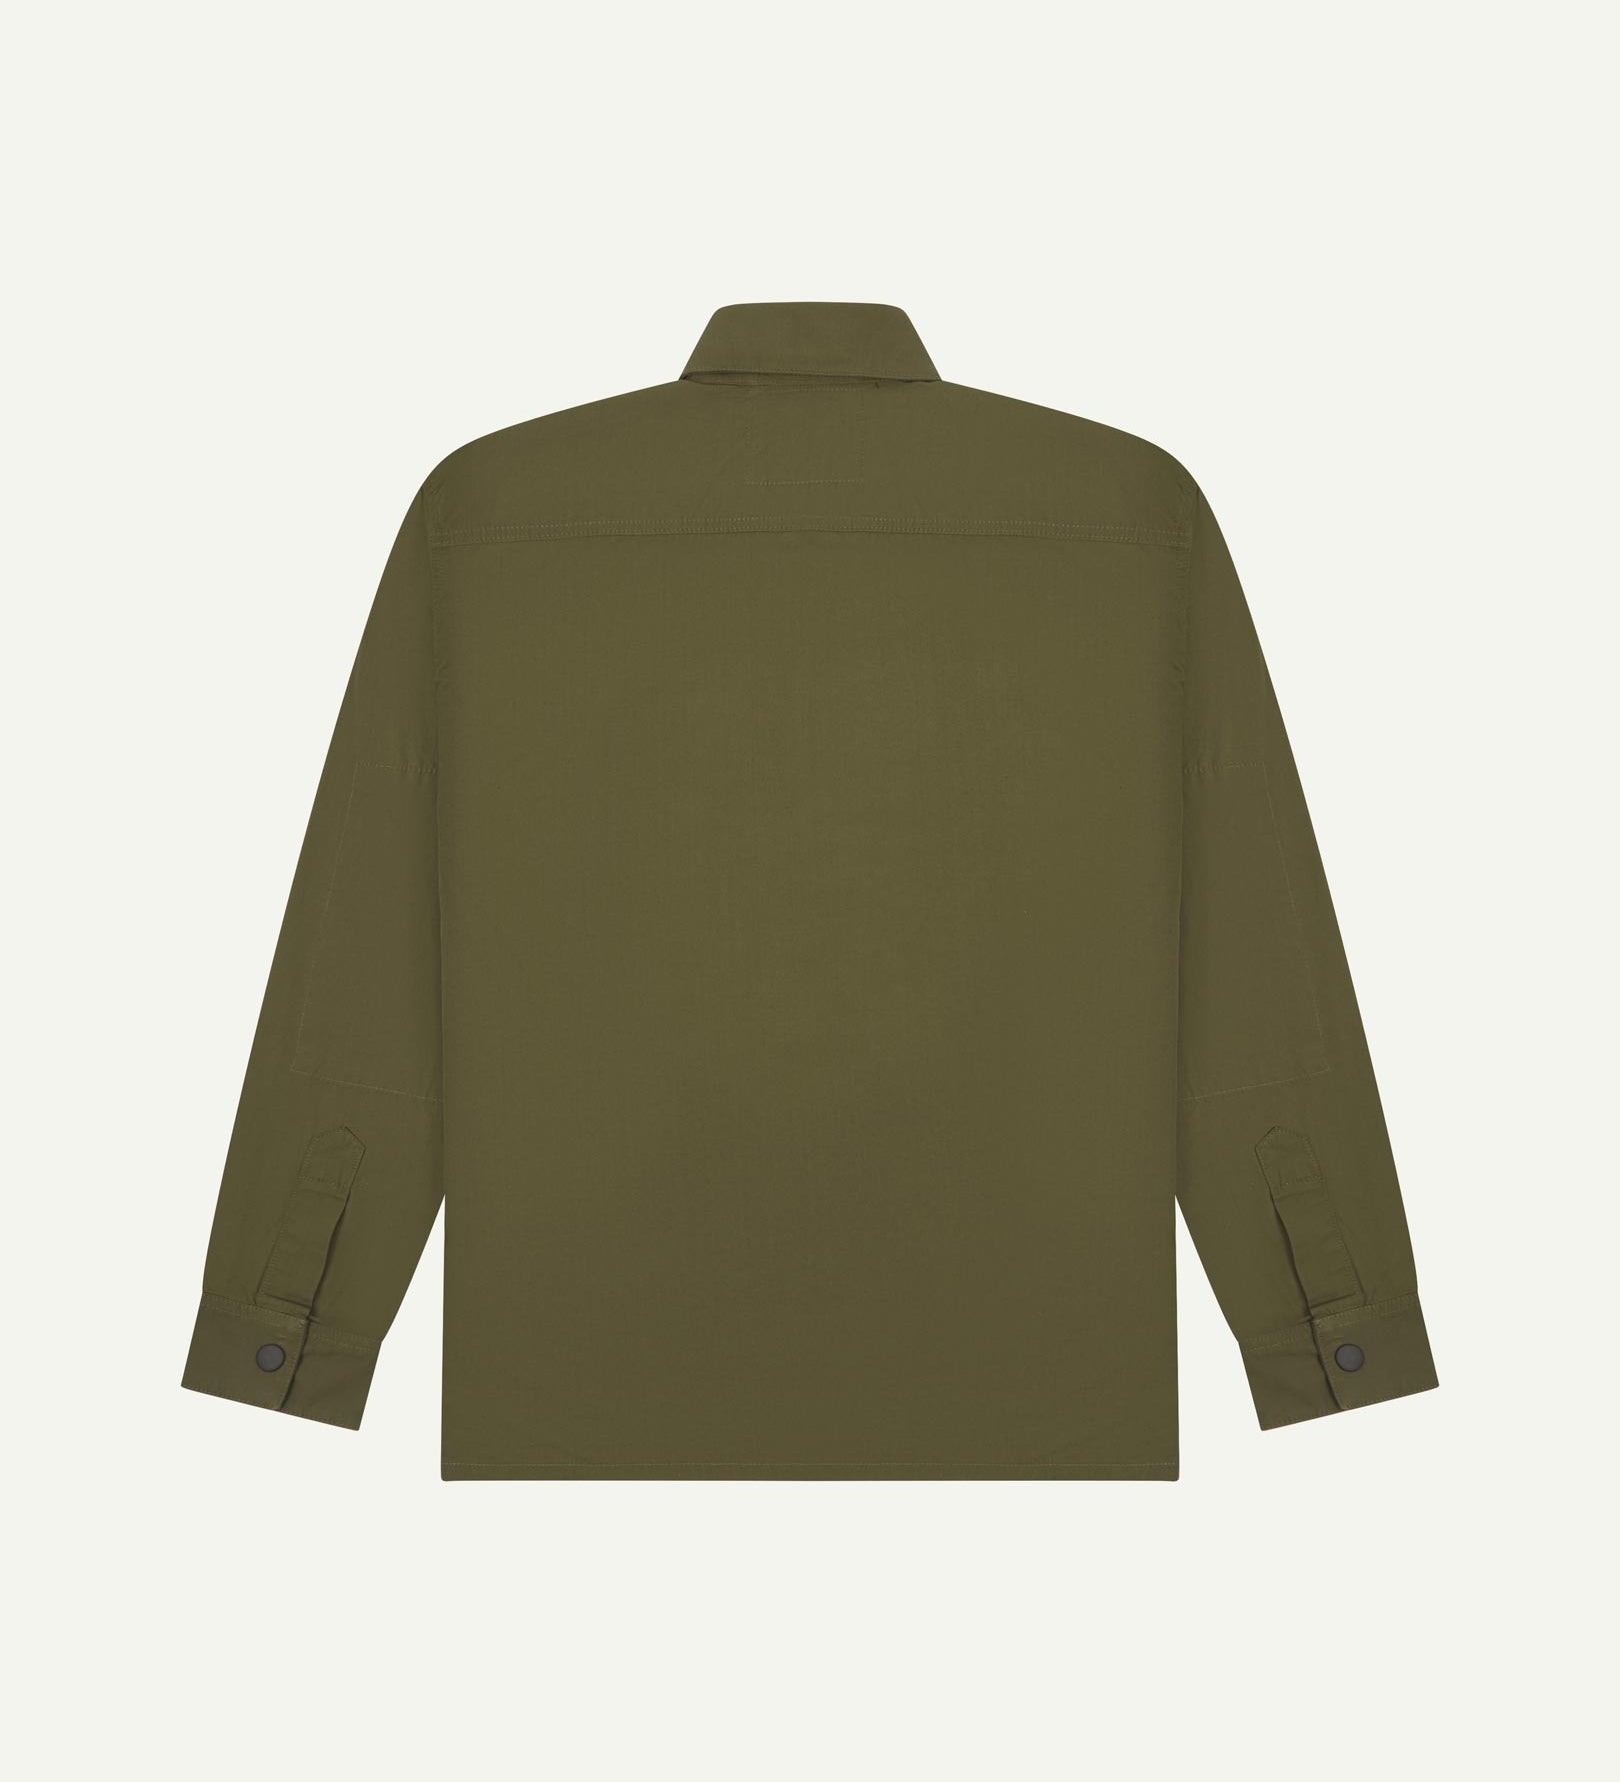 Reverse view of olive-green, lightweight overshirt showing reinforced elbows, boxy silhouette and 'popper' cuffs.